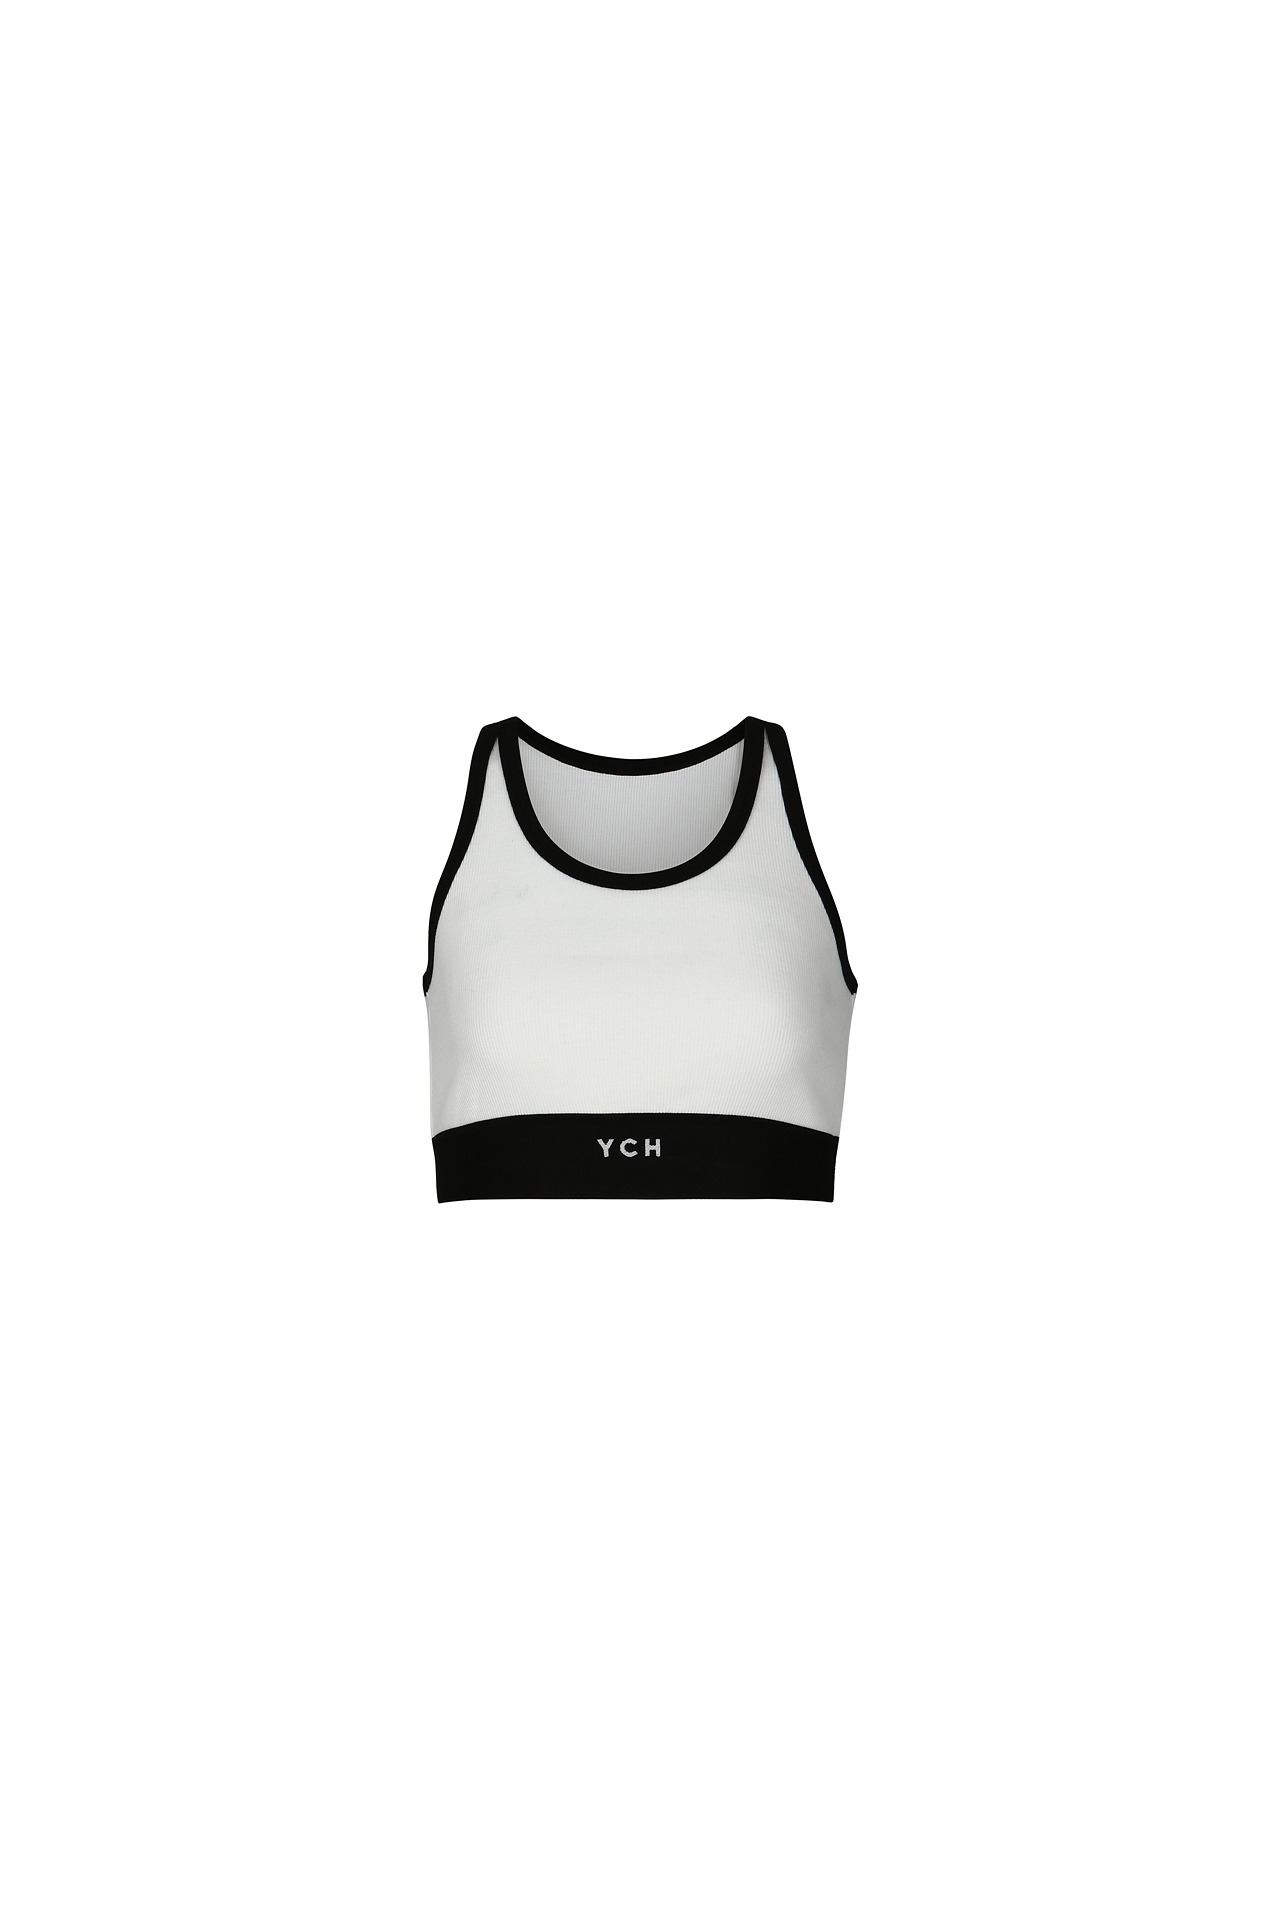 YCH-LOGO CROPPED TOP